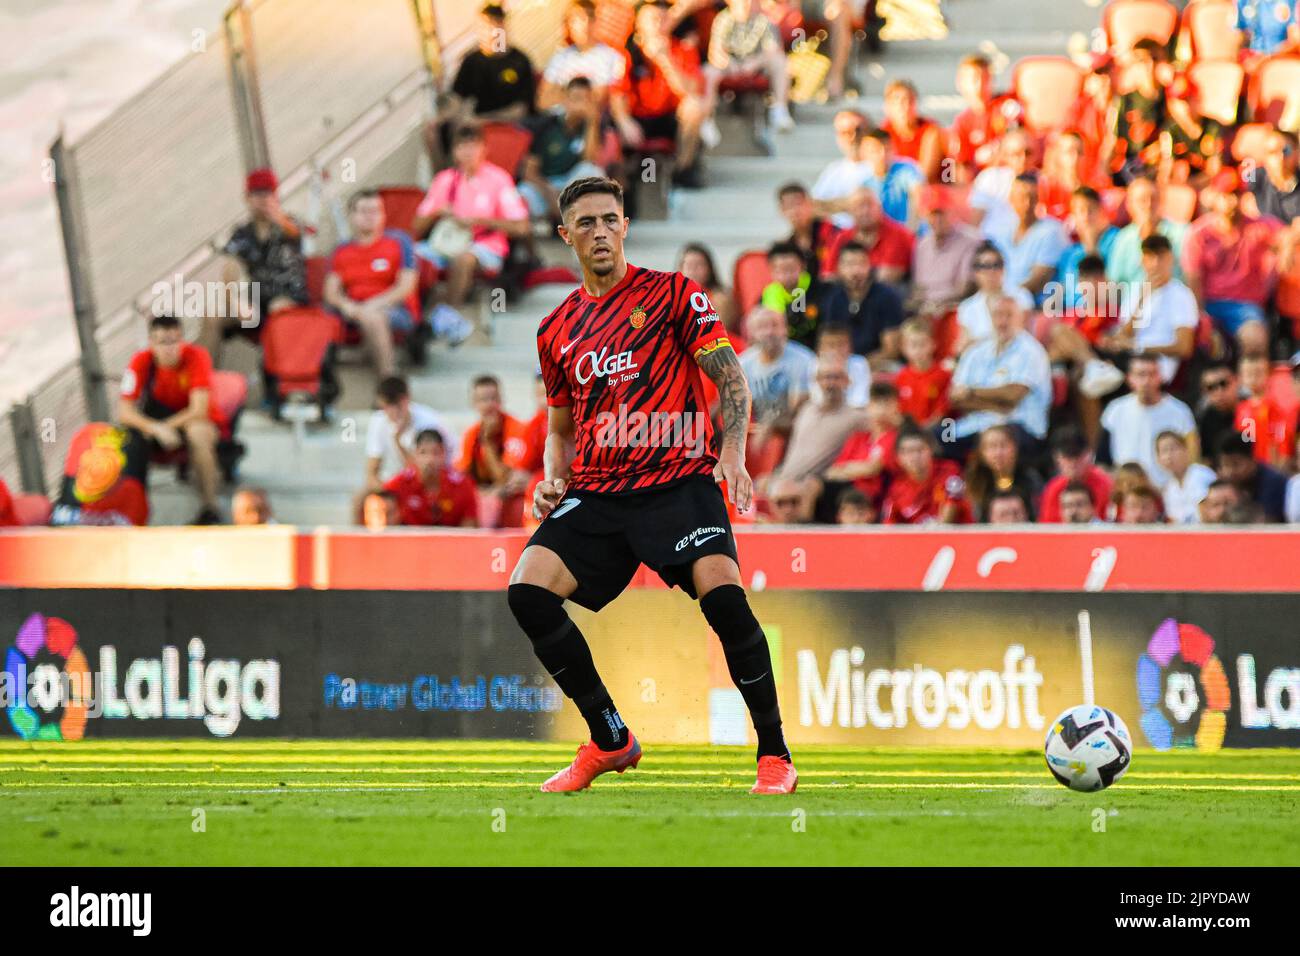 MALLORCA, SPAIN - AUGUST 20: Antonio Raillo of RCD Mallorca in the match between RCD Mallorca and Real Betis of La Liga Santander on August 20, 2022 at Visit Mallorca Stadium Son Moix in Mallorca, Spain. (Photo by Samuel Carreño/PxImages) Stock Photo